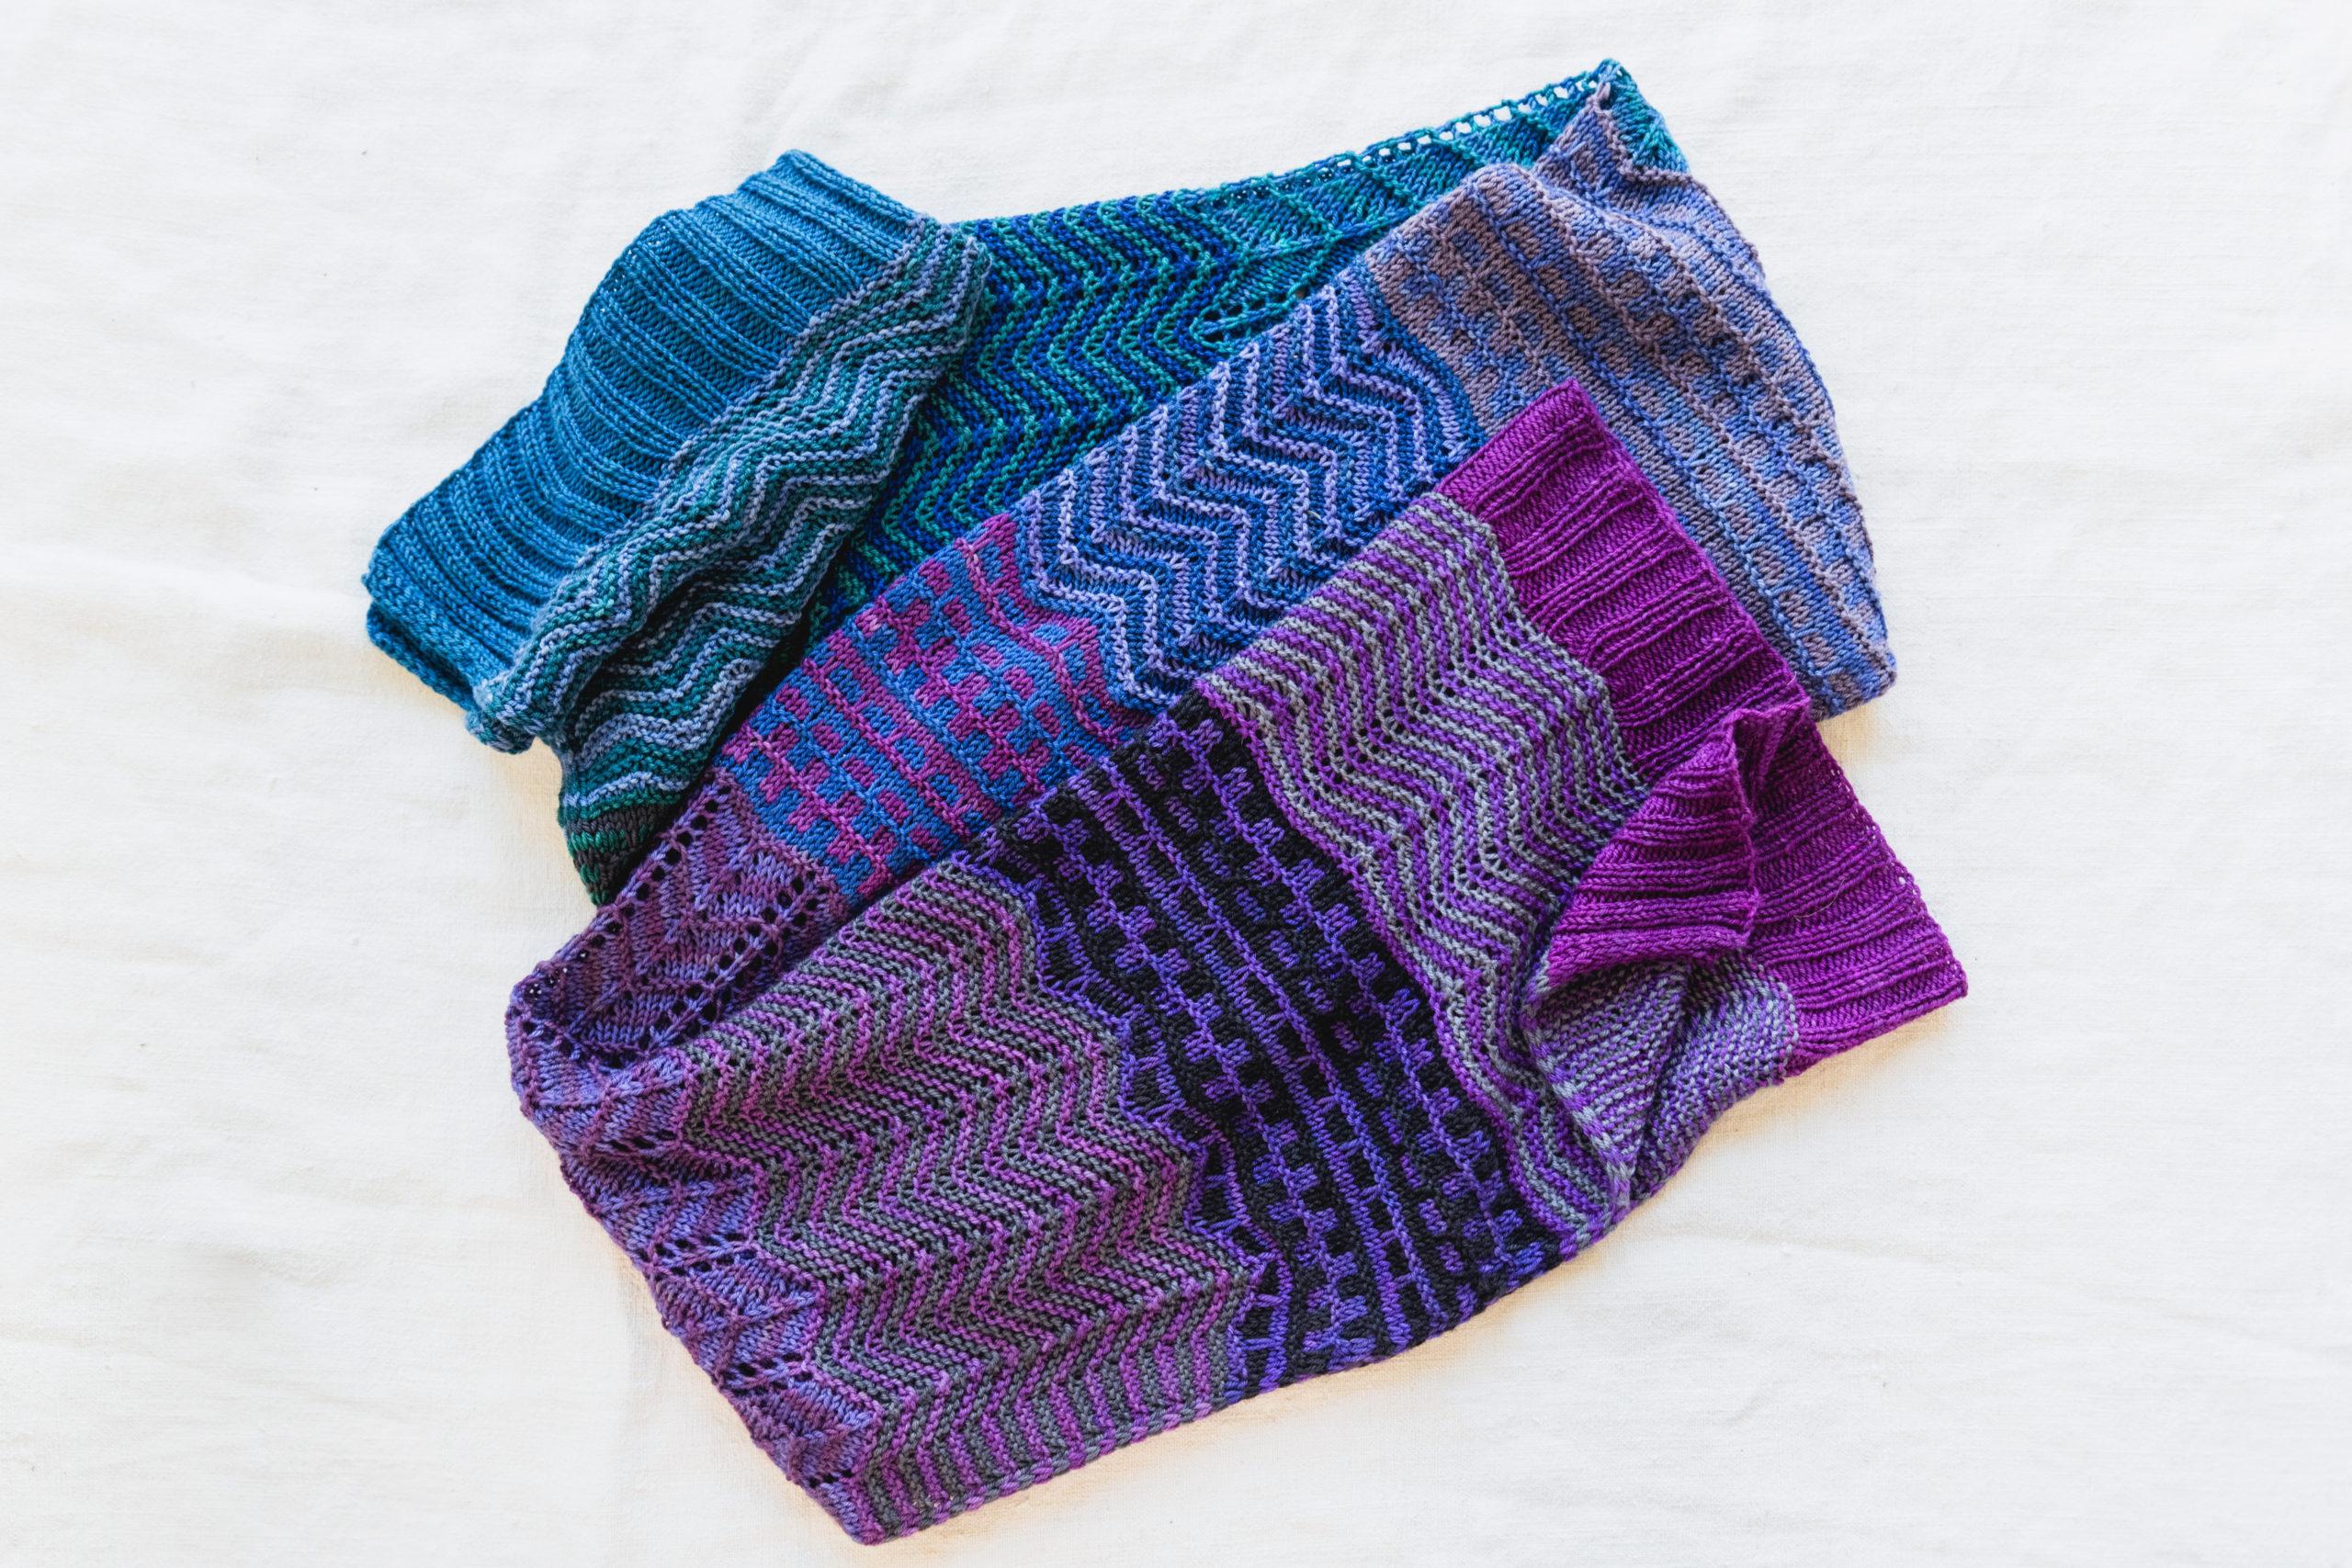 a long handknit wrap, The Skyline Wrap, scrunched up accordion style on a white background, knit in many shades of blue and purple